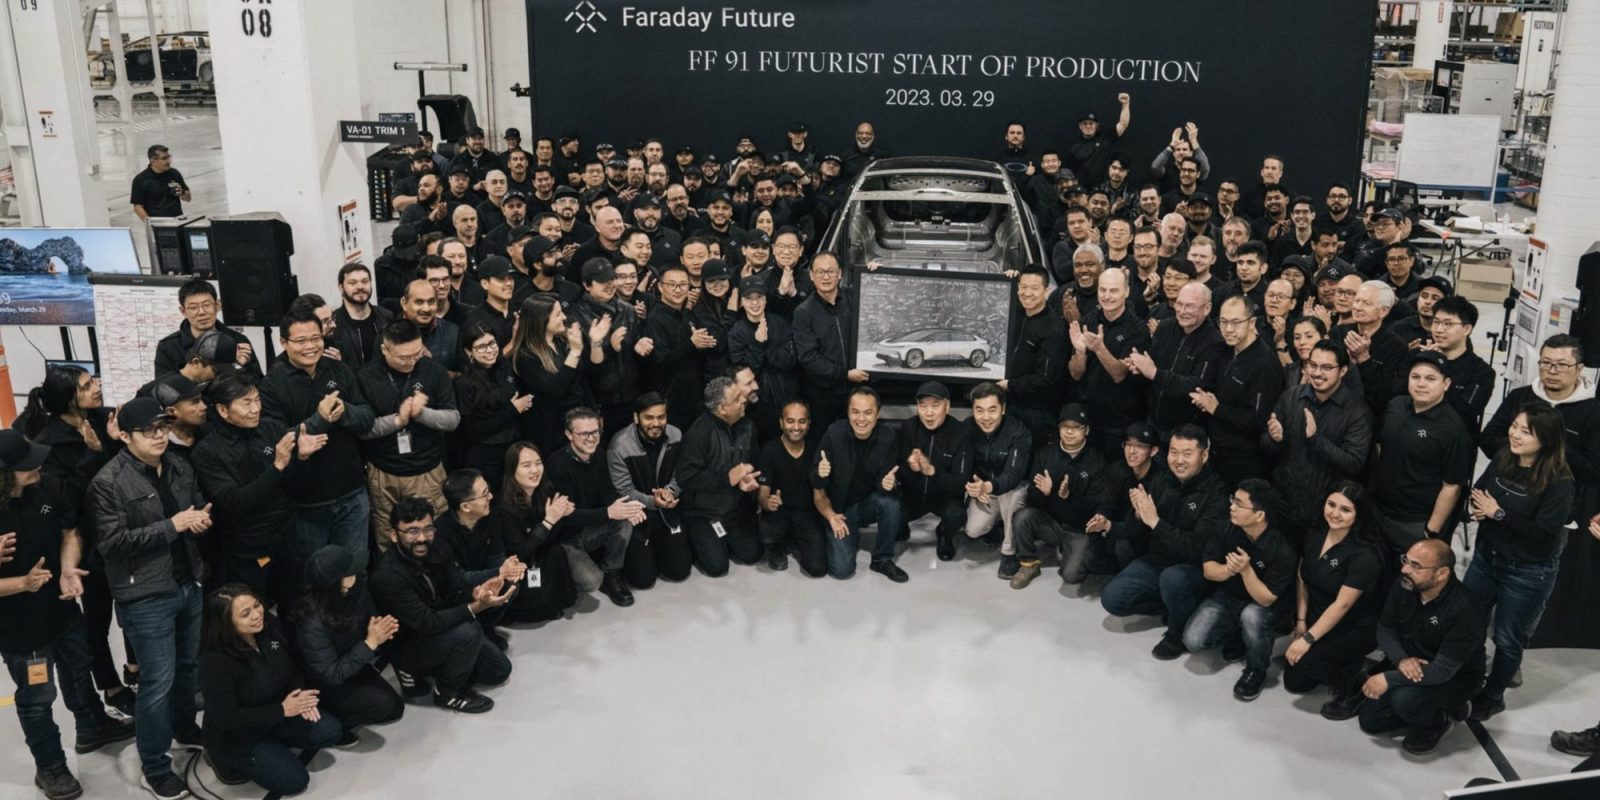 FF91 start of production hanford california